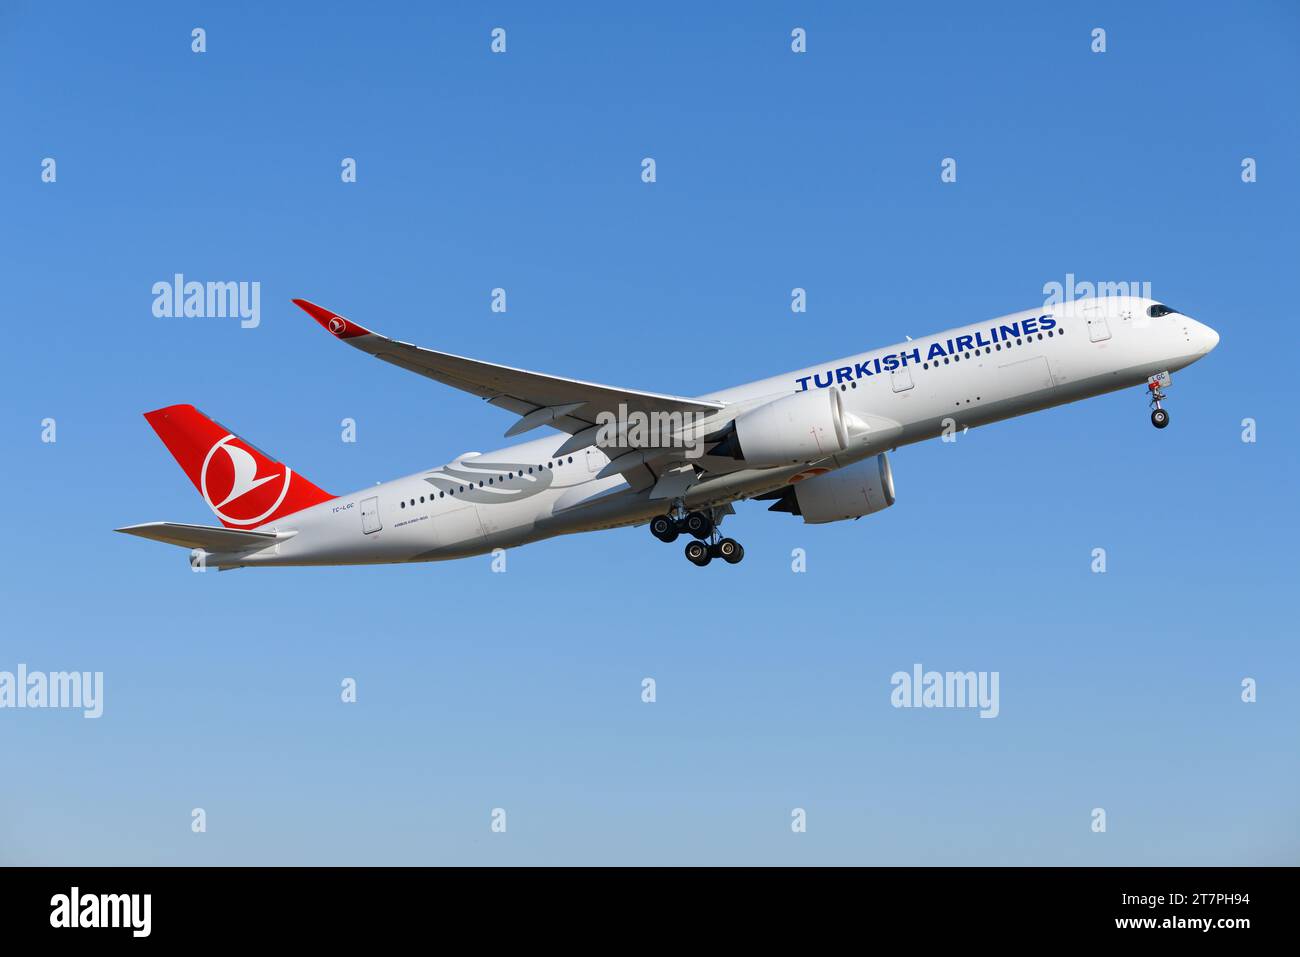 Turkish Airlines Airbus A350-900 decolla. Aereo A350-900XWB di Turkish Airlines in partenza. Aereo A350 in volo. Foto Stock